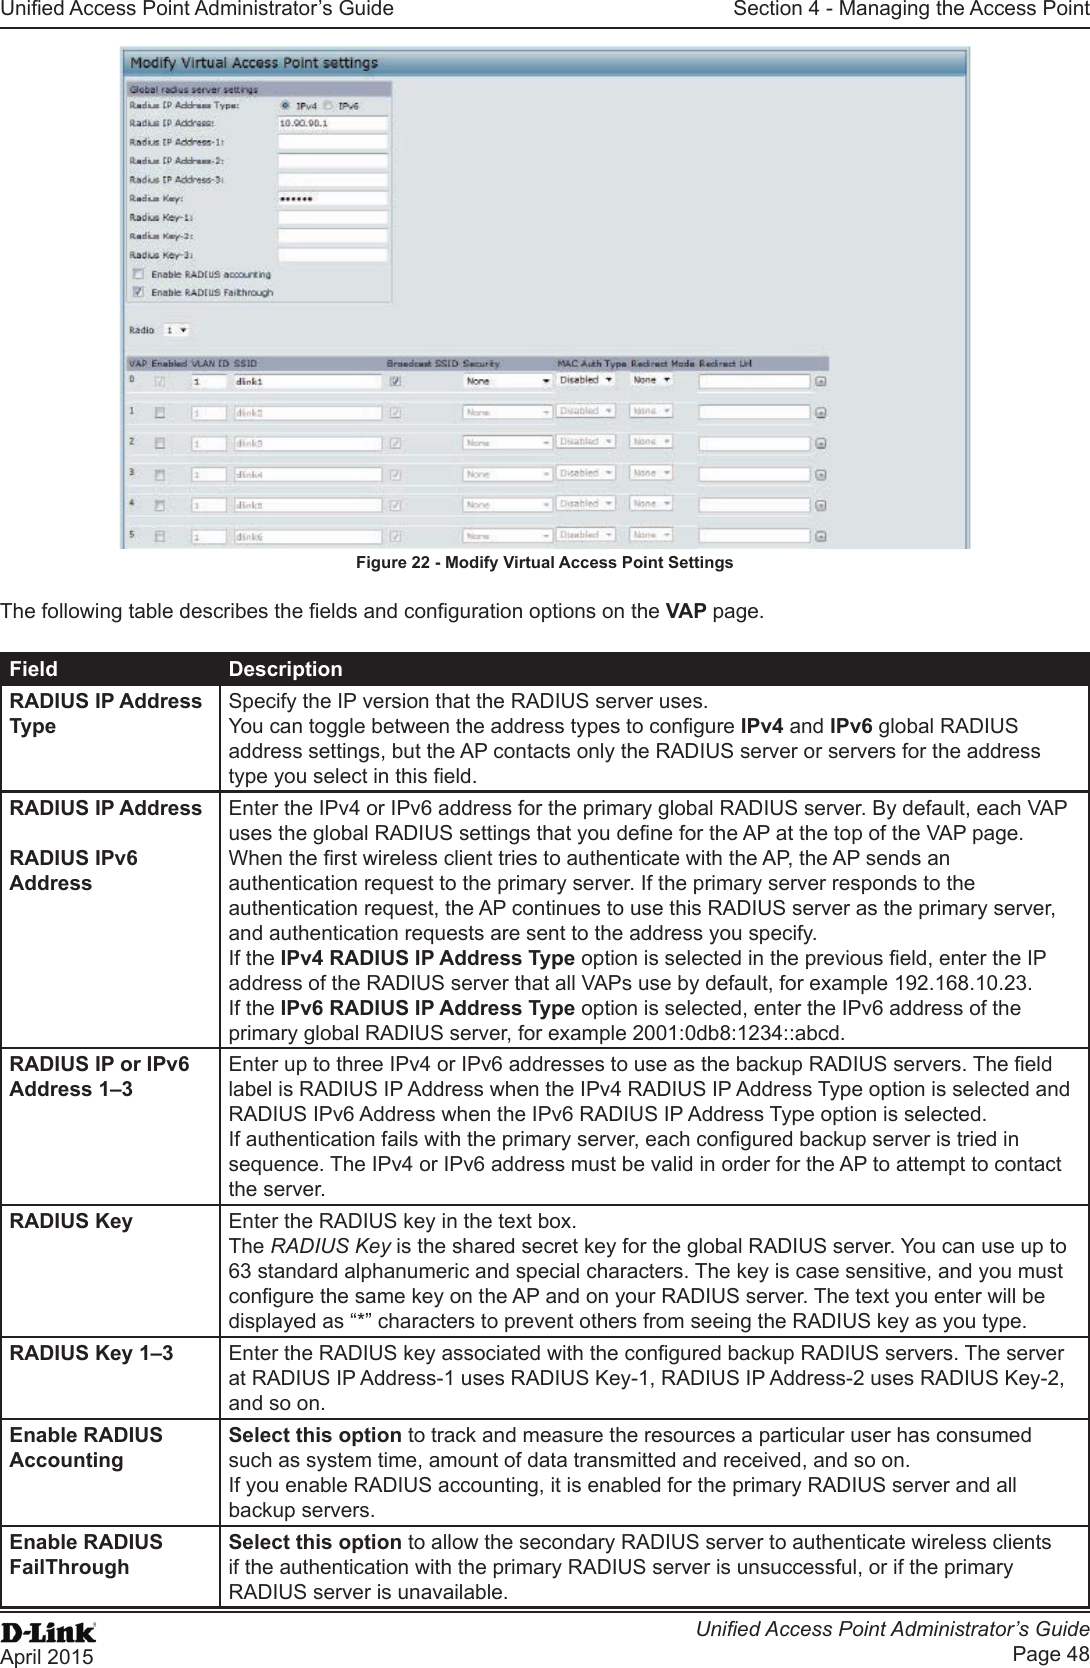 Unied Access Point Administrator’s GuideUnied Access Point Administrator’s GuidePage 48April 2015Section 4 - Managing the Access PointFigure 22 - Modify Virtual Access Point SettingsThe following table describes the elds and conguration options on the VAP page.Field DescriptionRADIUS IP Address TypeSpecify the IP version that the RADIUS server uses.You can toggle between the address types to congure IPv4 and IPv6 global RADIUS address settings, but the AP contacts only the RADIUS server or servers for the address type you select in this eld.RADIUS IP Address RADIUS IPv6 AddressEnter the IPv4 or IPv6 address for the primary global RADIUS server. By default, each VAP uses the global RADIUS settings that you dene for the AP at the top of the VAP page.When the rst wireless client tries to authenticate with the AP, the AP sends an authentication request to the primary server. If the primary server responds to the authentication request, the AP continues to use this RADIUS server as the primary server, and authentication requests are sent to the address you specify.If the IPv4 RADIUS IP Address Type option is selected in the previous eld, enter the IP address of the RADIUS server that all VAPs use by default, for example 192.168.10.23. If the IPv6 RADIUS IP Address Type option is selected, enter the IPv6 address of the primary global RADIUS server, for example 2001:0db8:1234::abcd.RADIUS IP or IPv6 Address 1–3Enter up to three IPv4 or IPv6 addresses to use as the backup RADIUS servers. The eld label is RADIUS IP Address when the IPv4 RADIUS IP Address Type option is selected and RADIUS IPv6 Address when the IPv6 RADIUS IP Address Type option is selected.If authentication fails with the primary server, each congured backup server is tried in sequence. The IPv4 or IPv6 address must be valid in order for the AP to attempt to contact the server.RADIUS Key Enter the RADIUS key in the text box.The RADIUS Key is the shared secret key for the global RADIUS server. You can use up to 63 standard alphanumeric and special characters. The key is case sensitive, and you must congure the same key on the AP and on your RADIUS server. The text you enter will be displayed as “*” characters to prevent others from seeing the RADIUS key as you type.RADIUS Key 1–3 Enter the RADIUS key associated with the congured backup RADIUS servers. The server at RADIUS IP Address-1 uses RADIUS Key-1, RADIUS IP Address-2 uses RADIUS Key-2, and so on.Enable RADIUS AccountingSelect this option to track and measure the resources a particular user has consumed such as system time, amount of data transmitted and received, and so on.If you enable RADIUS accounting, it is enabled for the primary RADIUS server and all backup servers.Enable RADIUS FailThroughSelect this option to allow the secondary RADIUS server to authenticate wireless clients if the authentication with the primary RADIUS server is unsuccessful, or if the primary RADIUS server is unavailable.